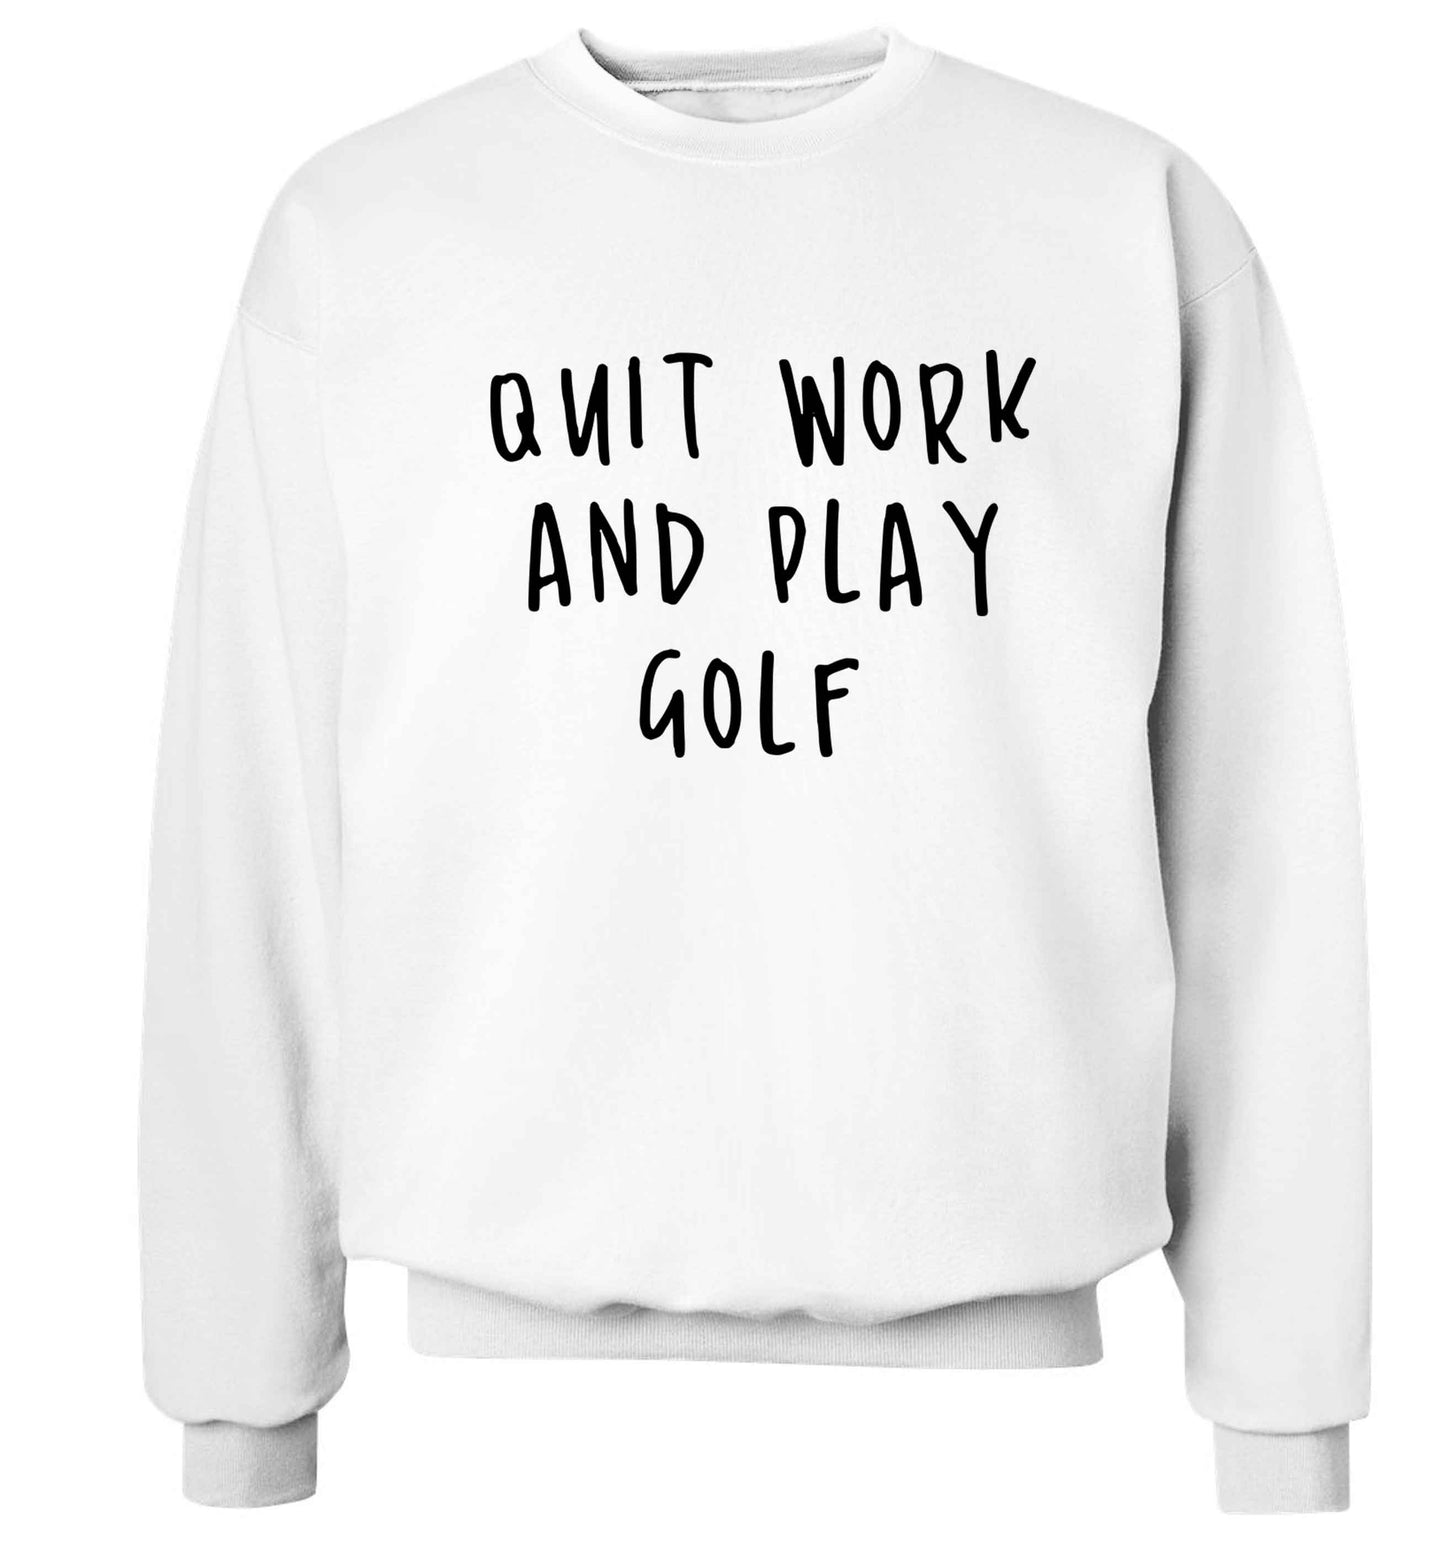 Quit work and play golf Adult's unisex white Sweater 2XL